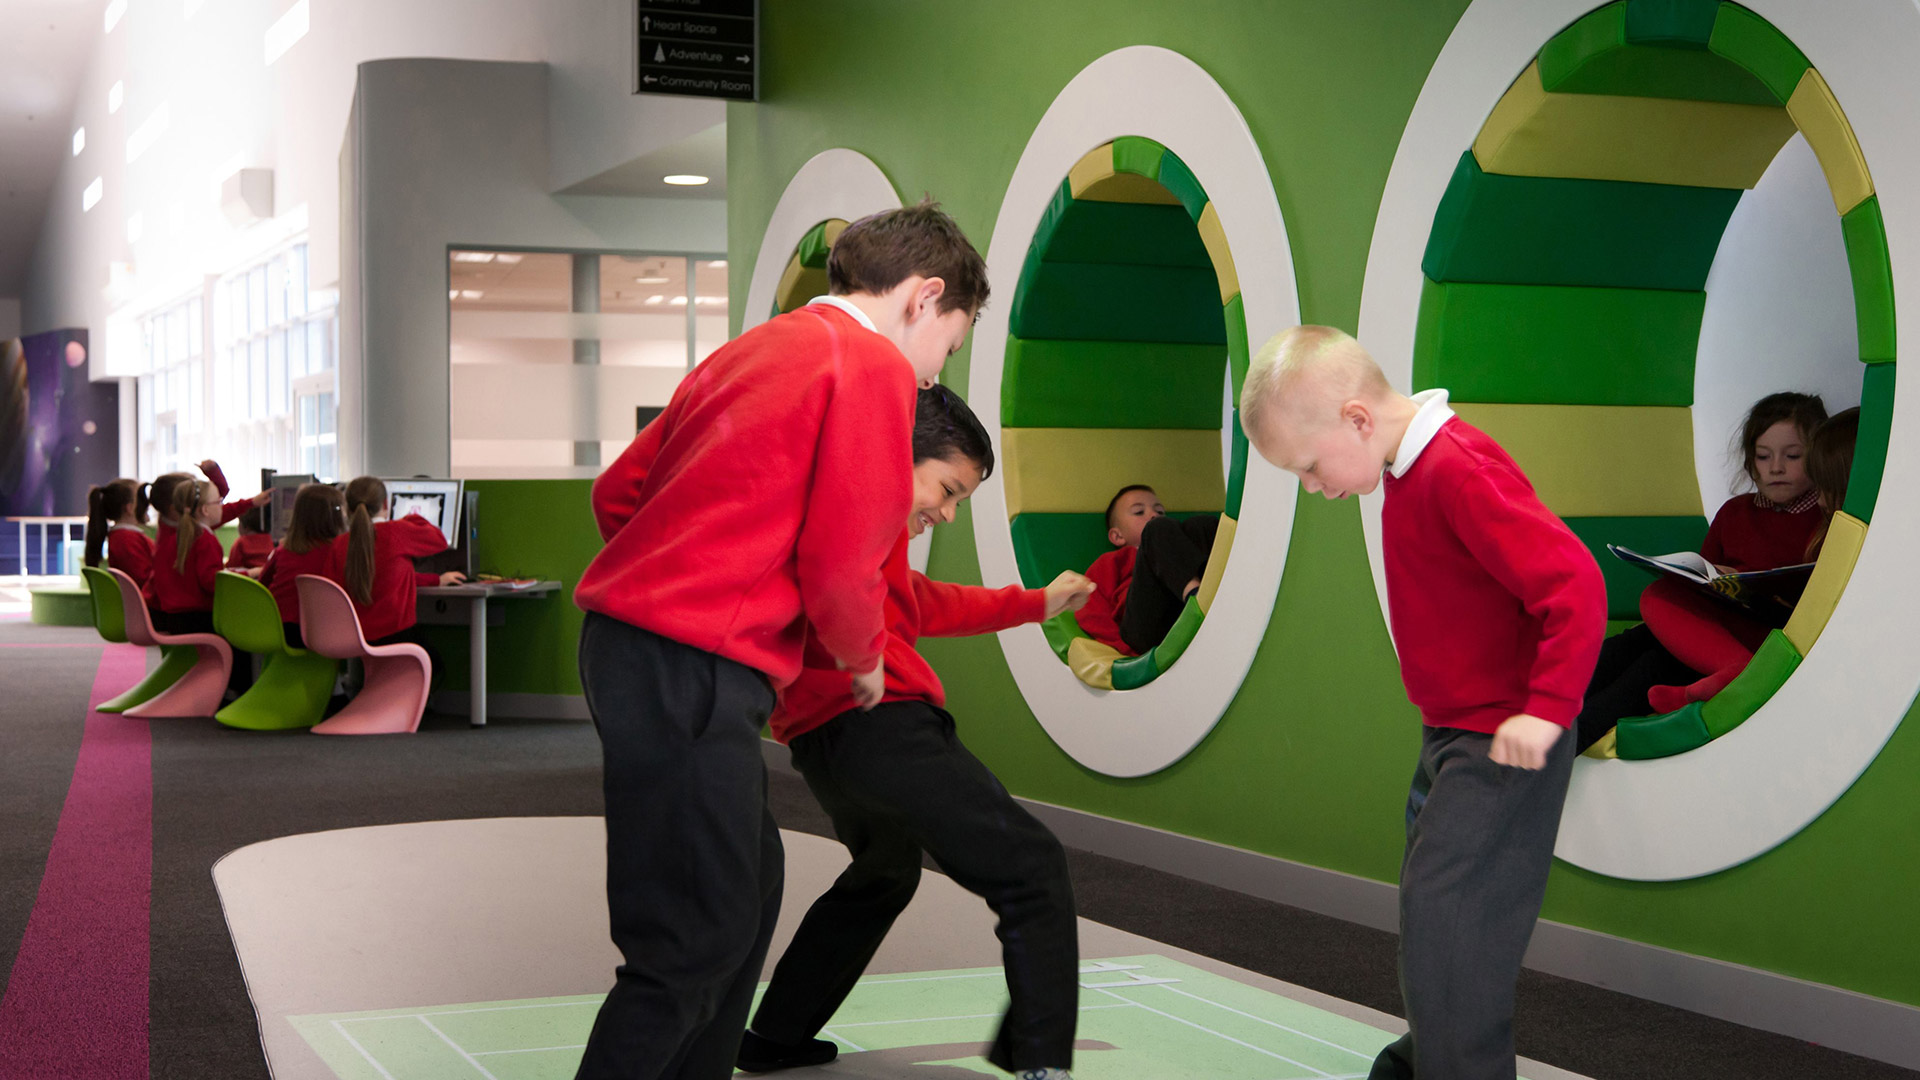 Children playing with an interactive floor game